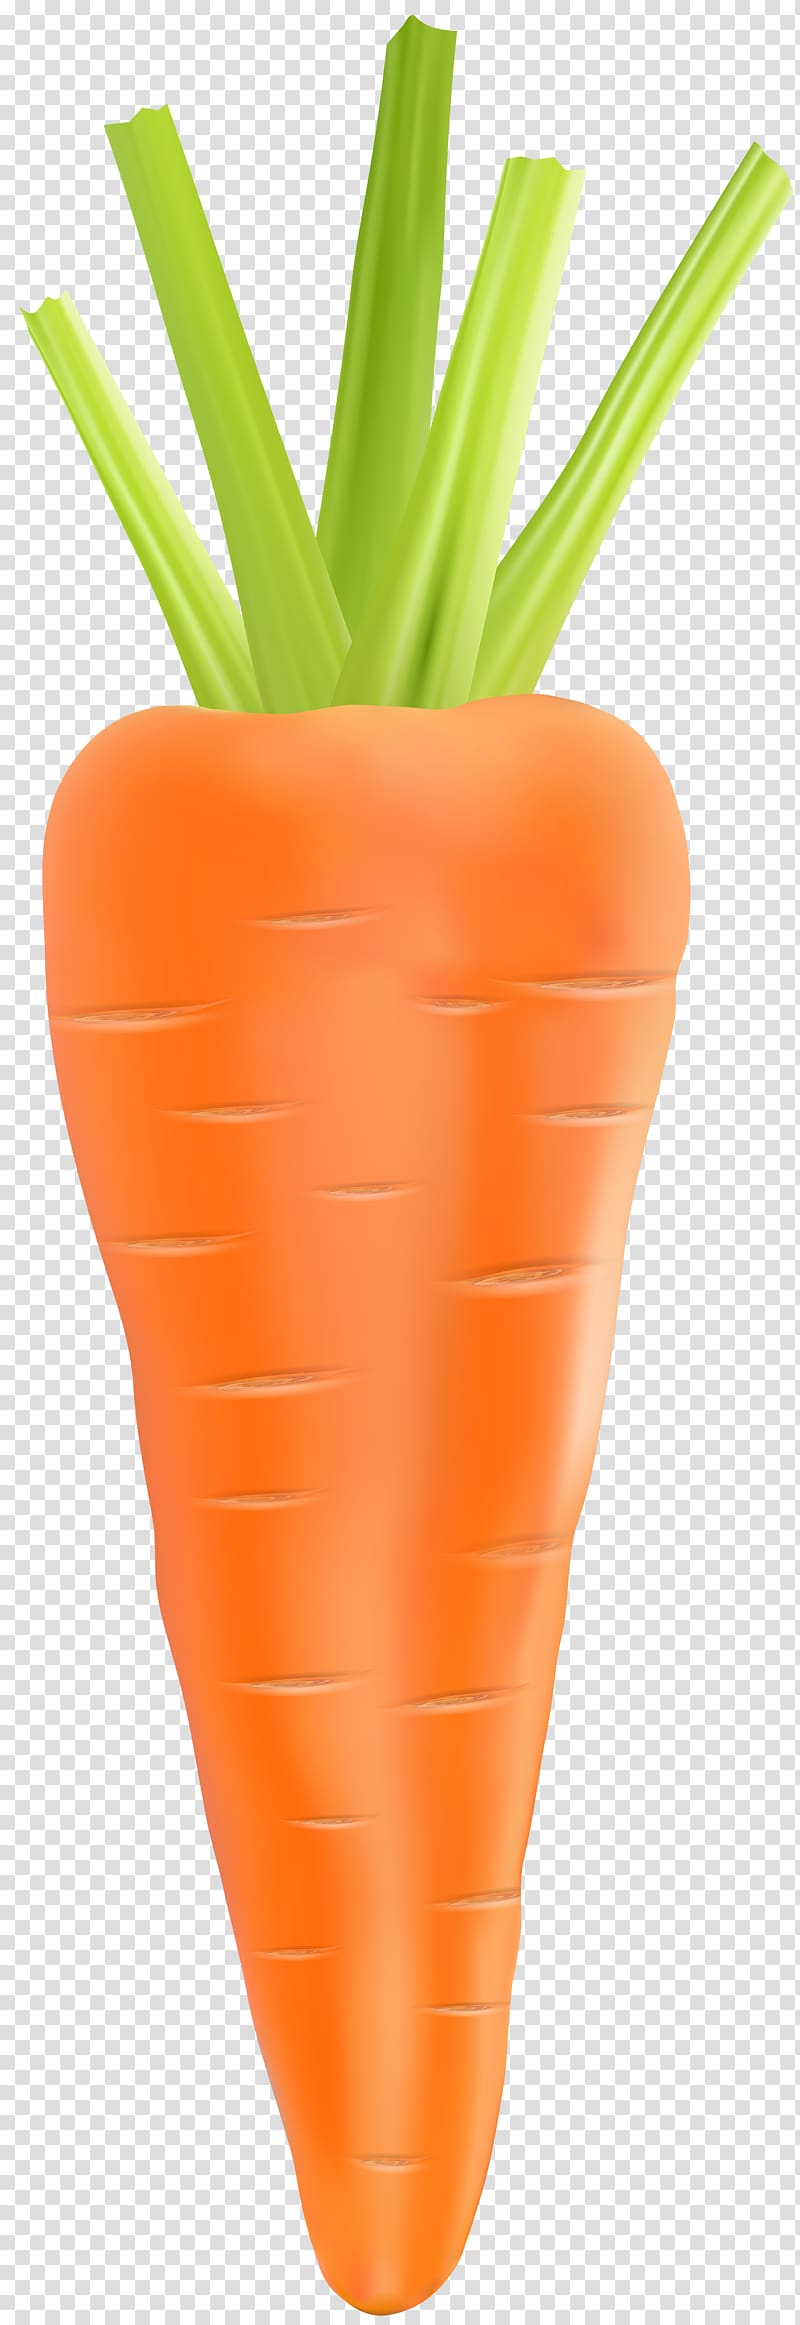 carrot , Carrot Vegetable, Carrot transparent background PNG clipart